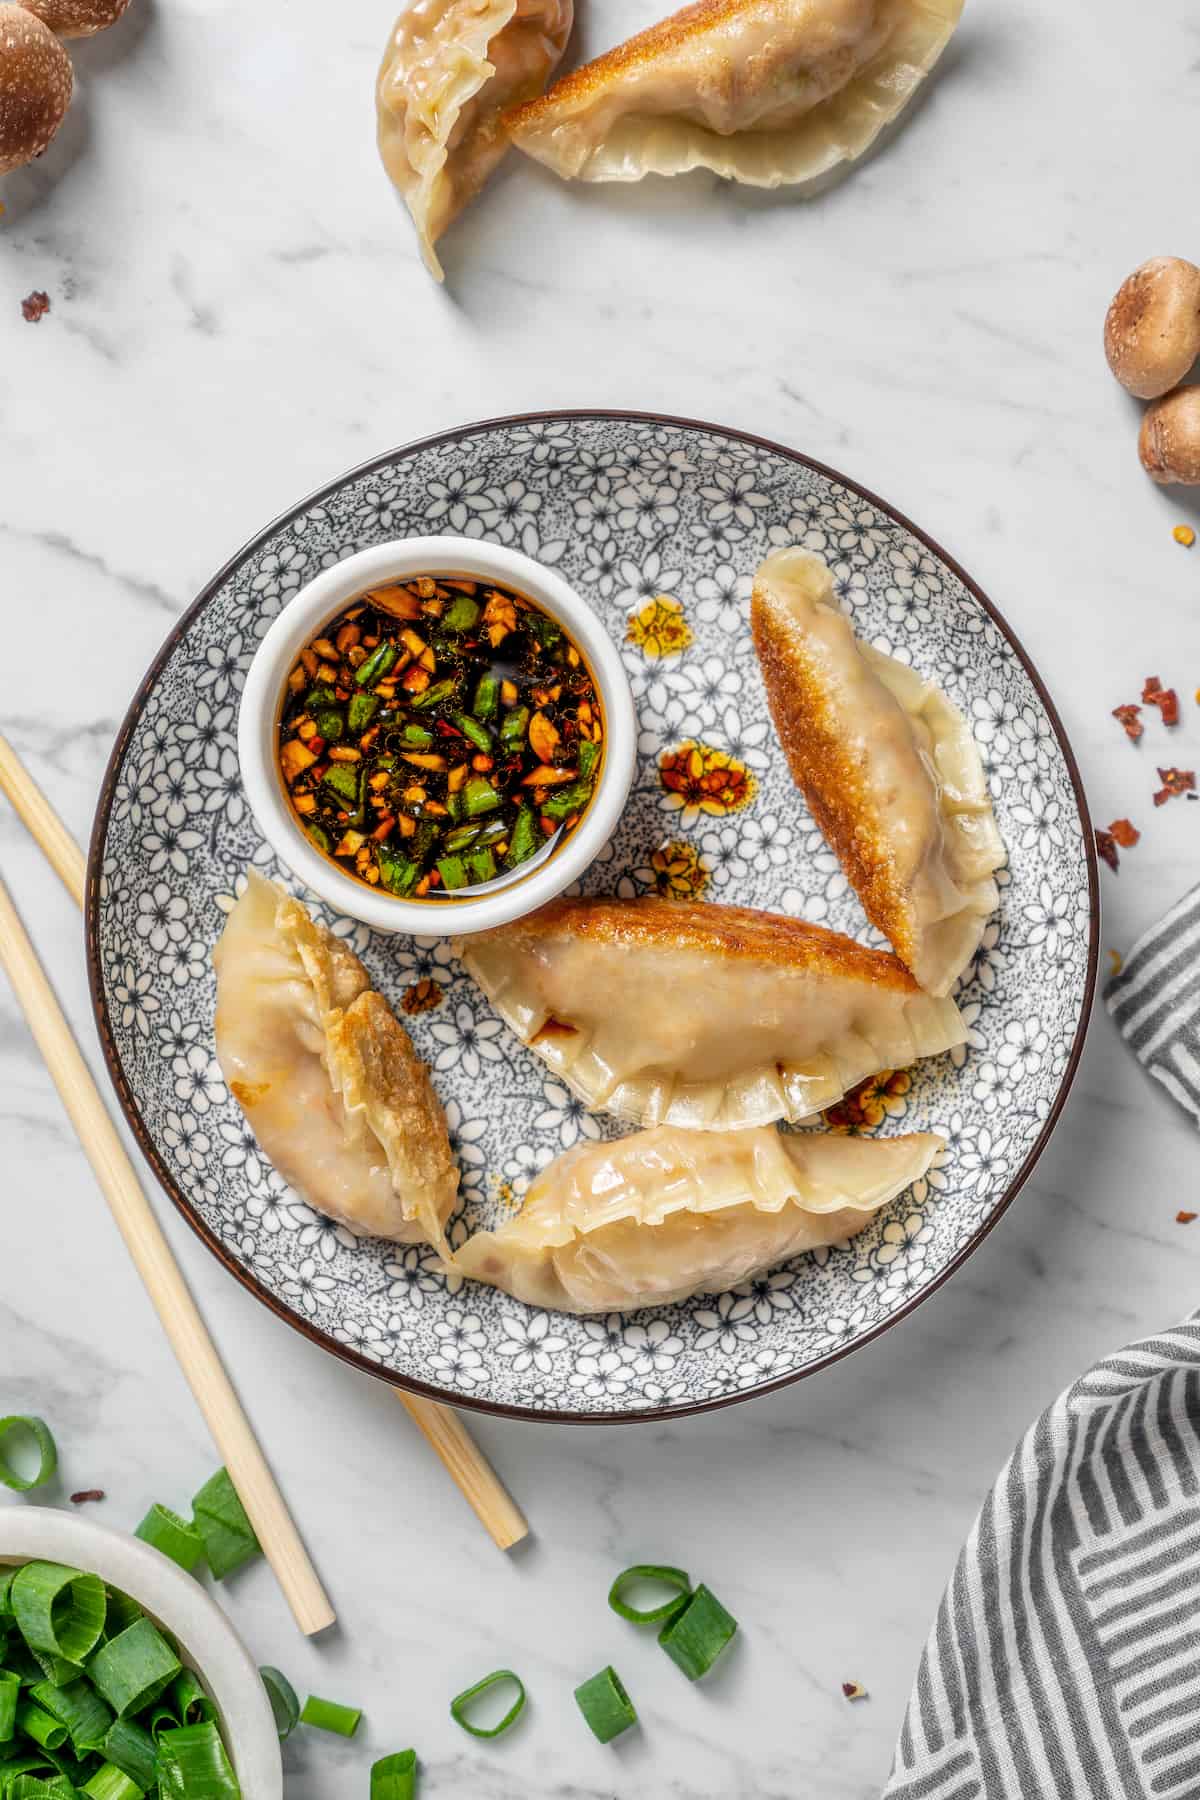 Overhead view of vegan dumplings on plate with dipping sauce